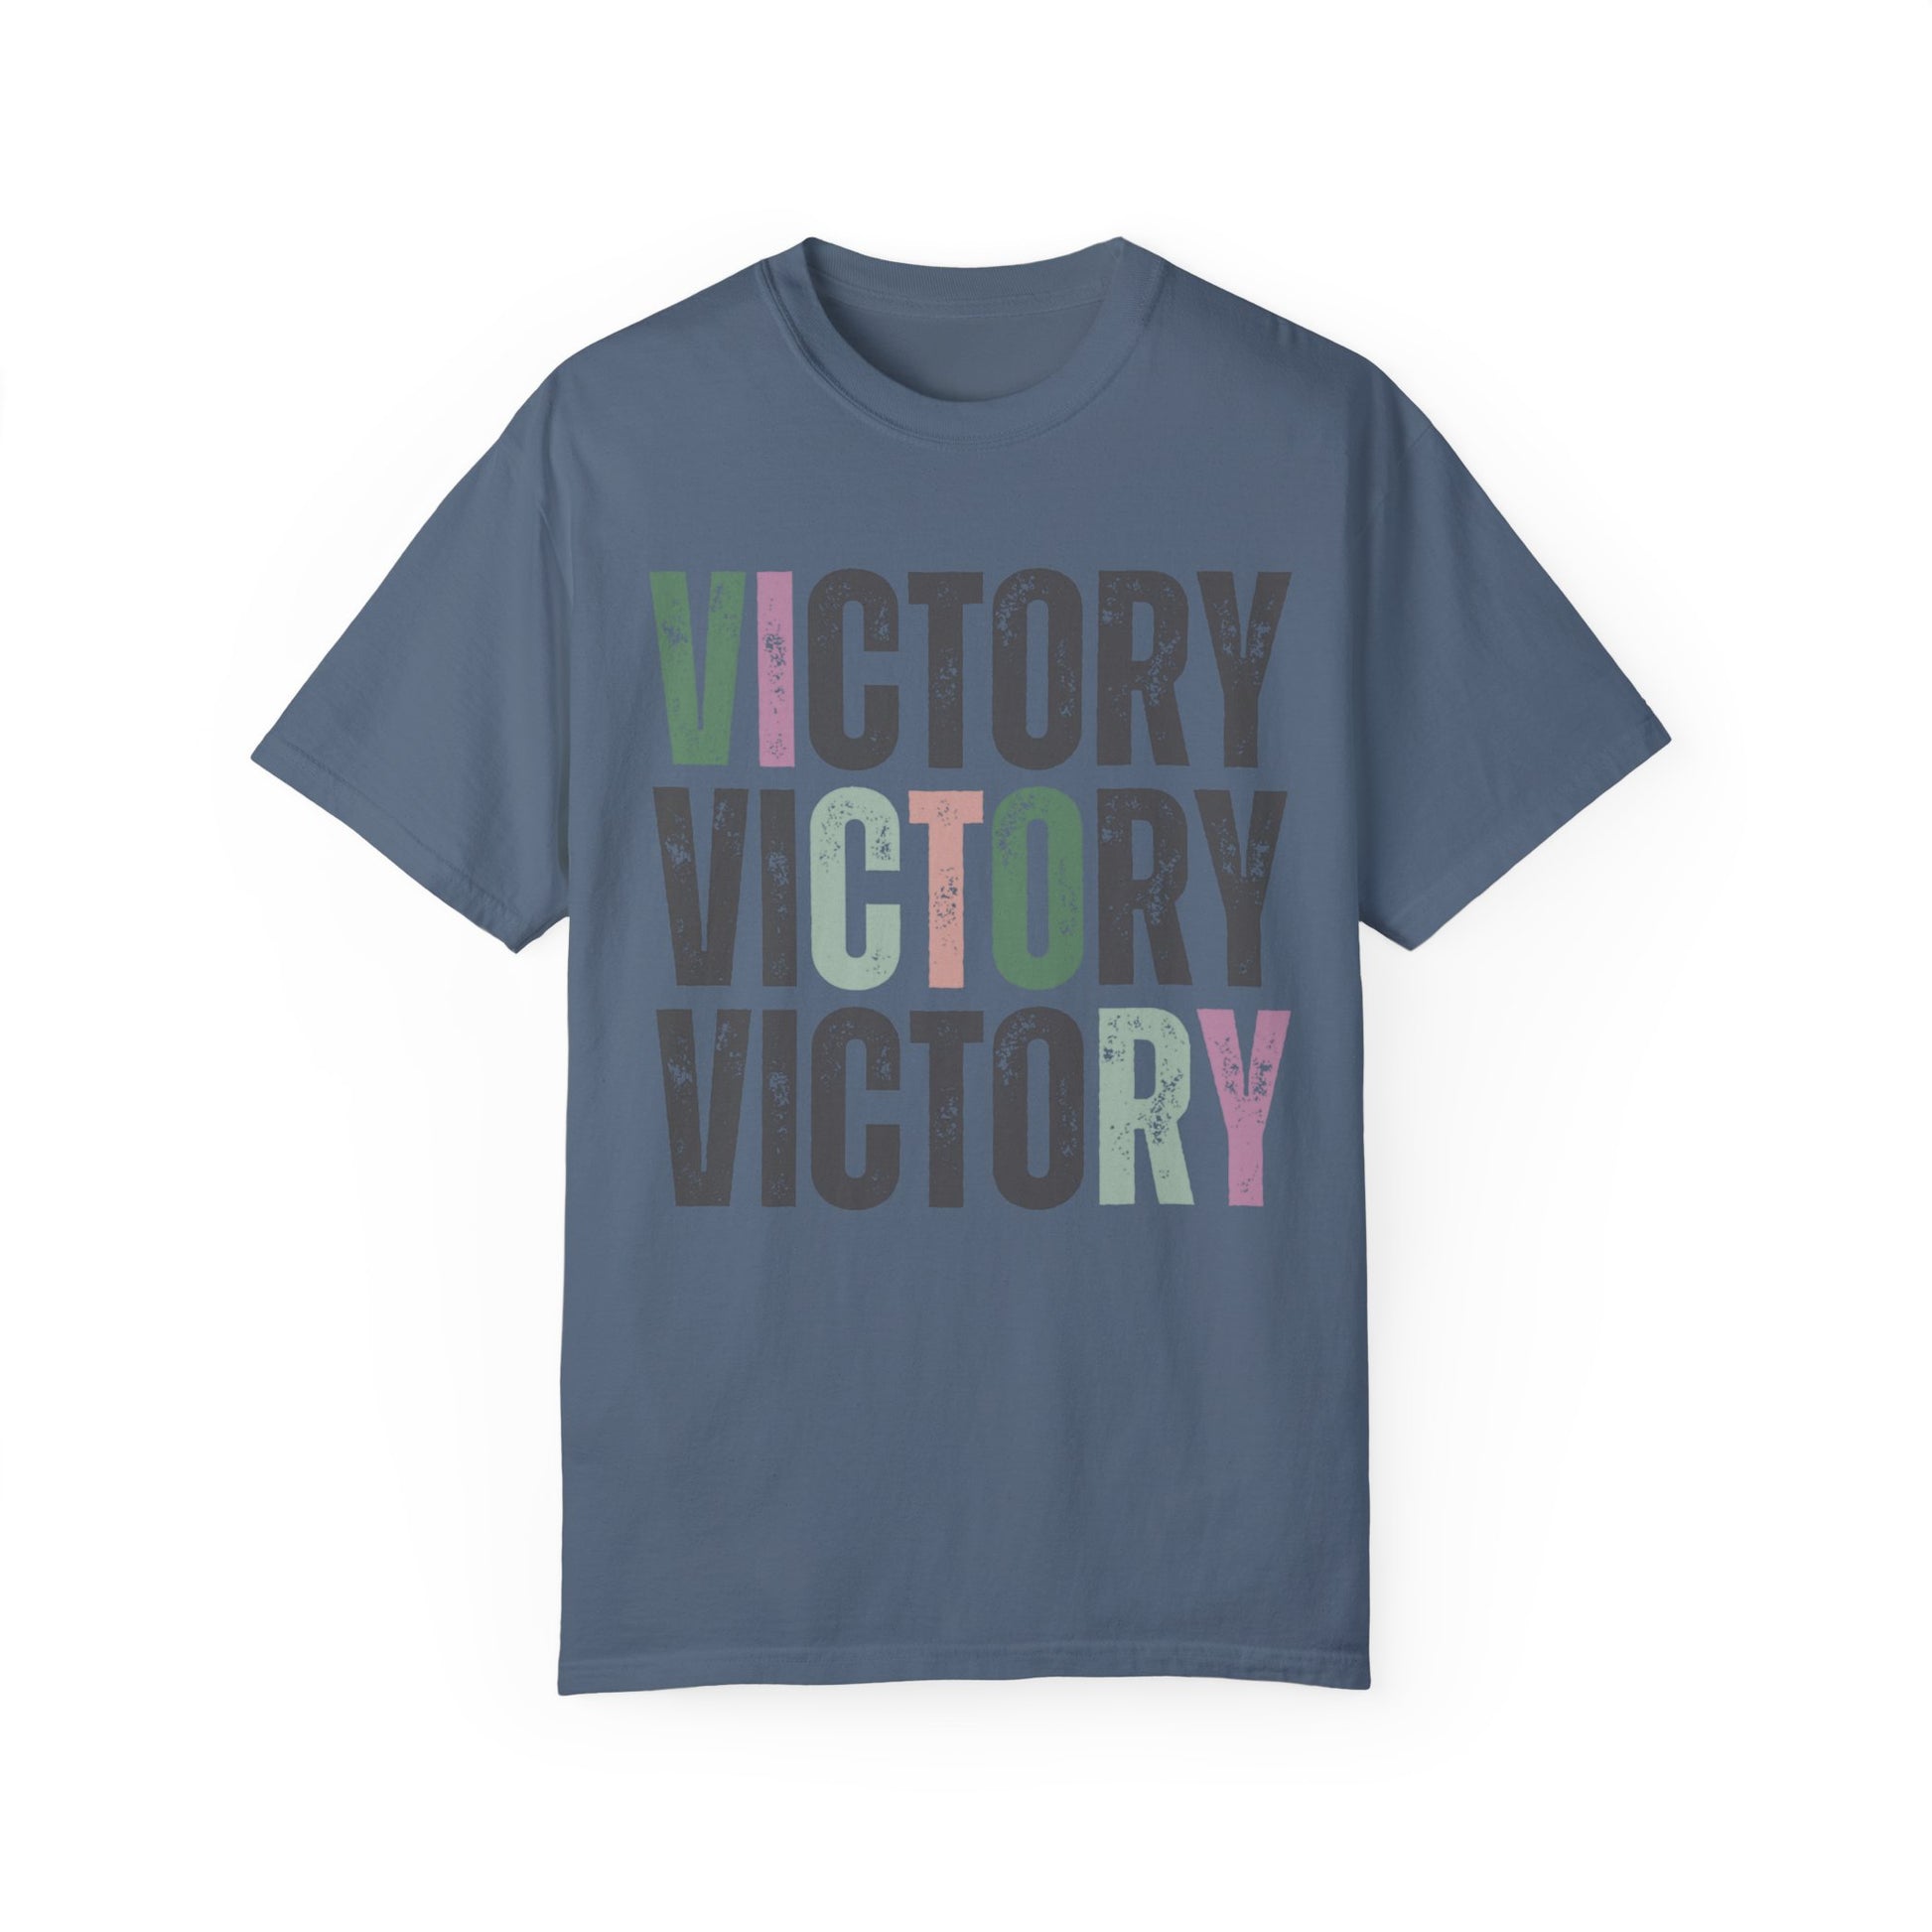 Victorious Vibes Women's Comfort Colors T-Shirt - Eddy and Rita